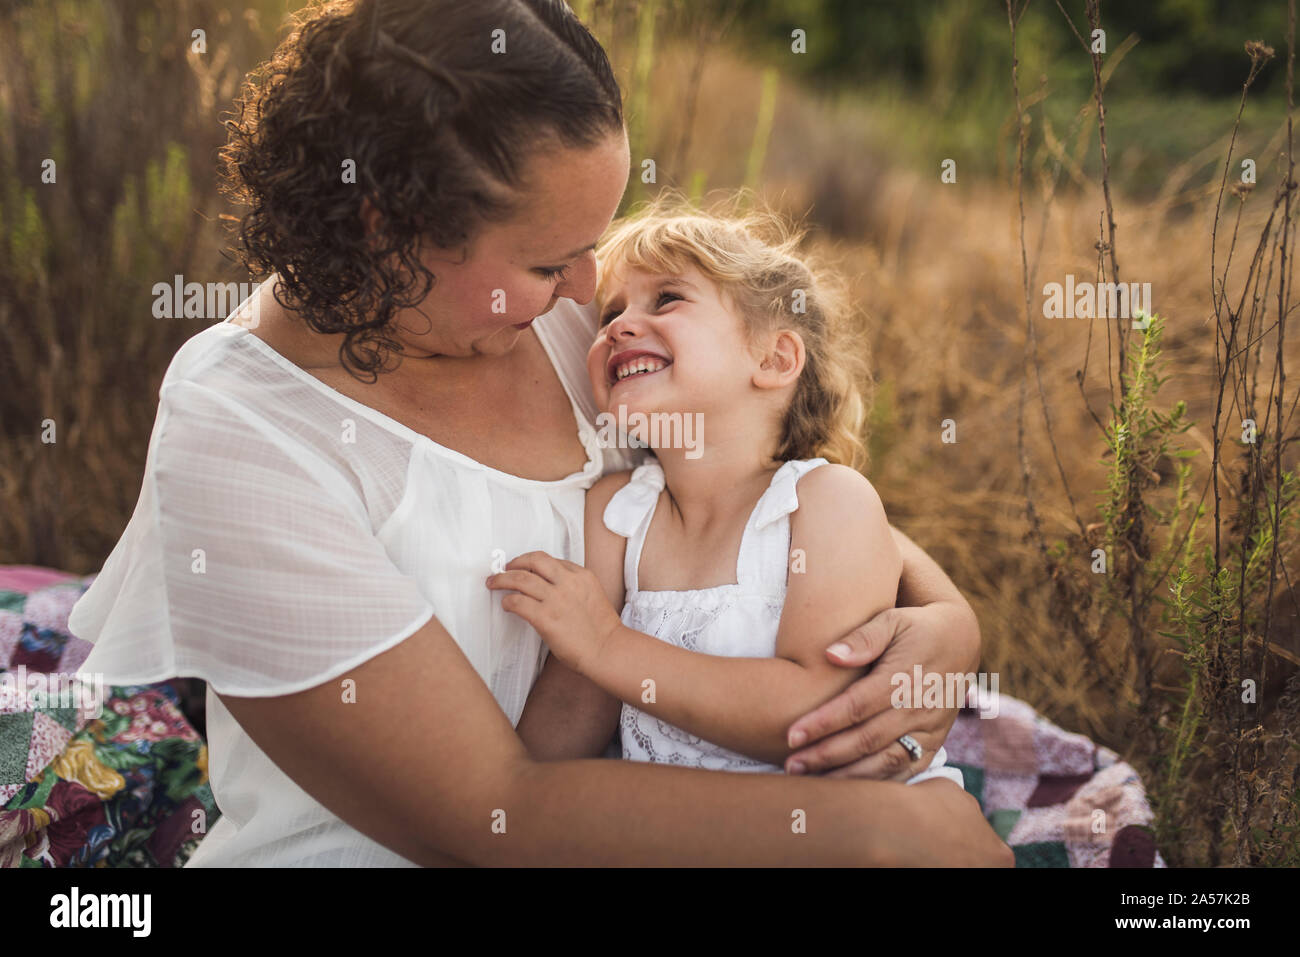 Dark-haired mom cuddles smiling young daughter outdoors on quilt Stock Photo